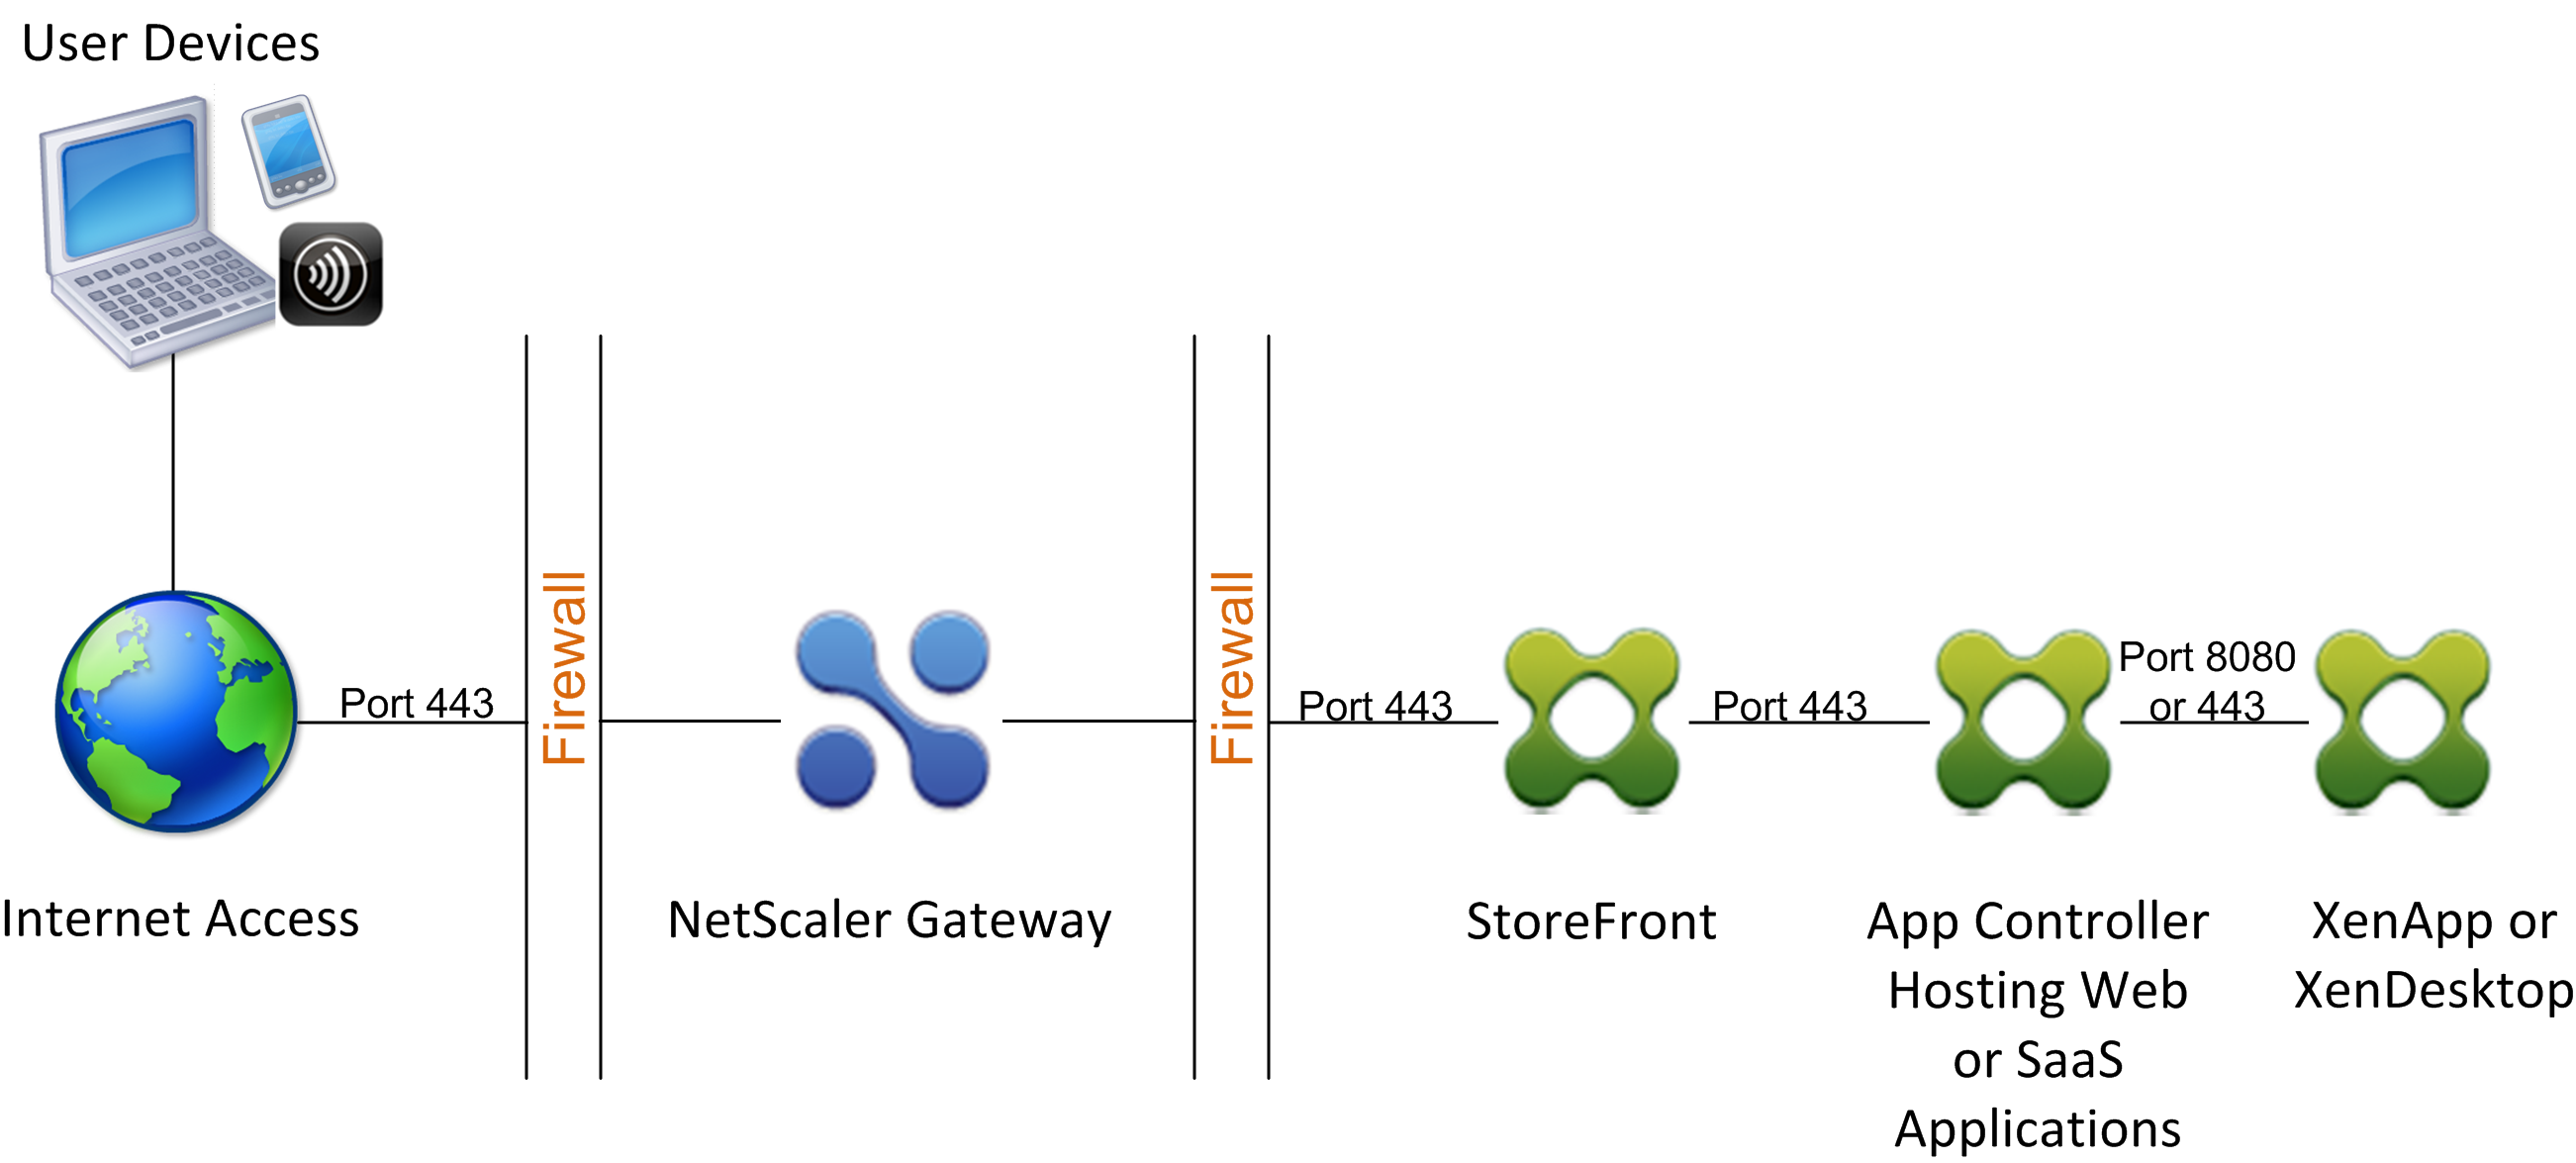 Deploying Citrix Gateway with StoreFront in Front of Endpoint Management